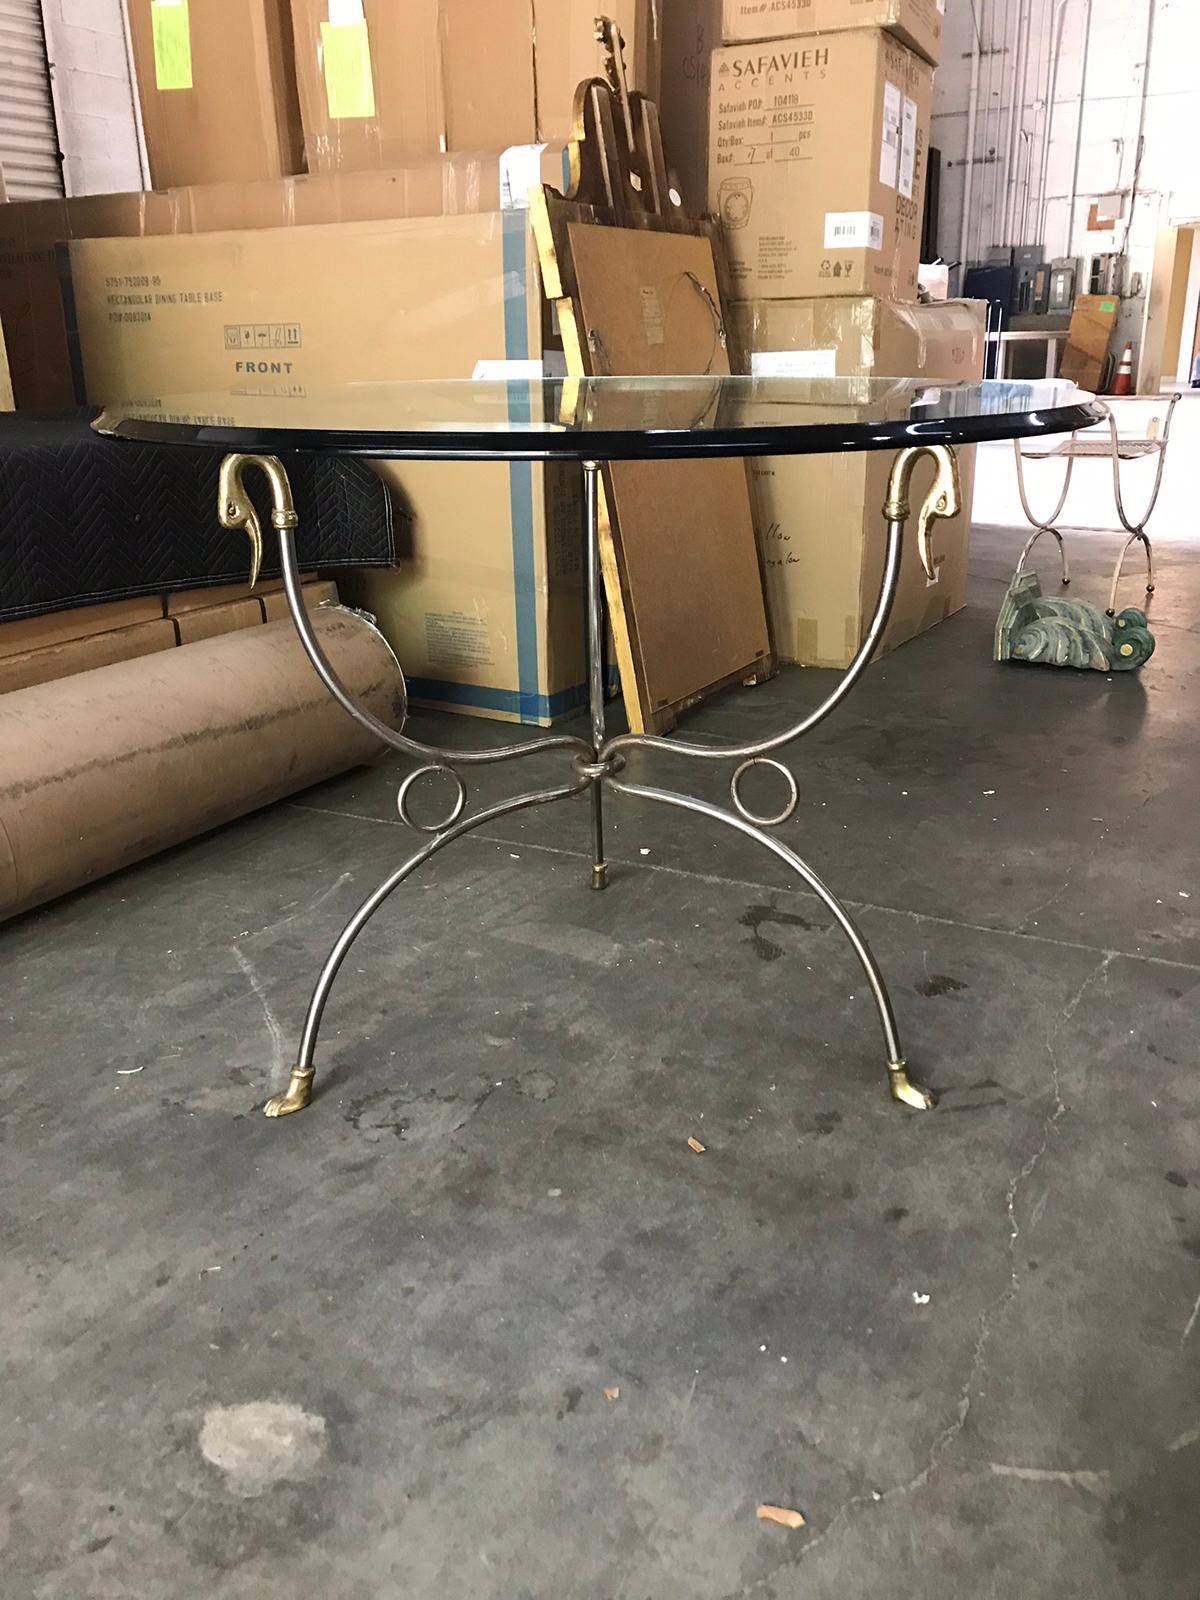 Mid-20th century Italian round steel Gueridon table with brass swans, brass feet, and glass top, circa 1970s
In the style of Maison Jansen
Glass top has beveled edge.